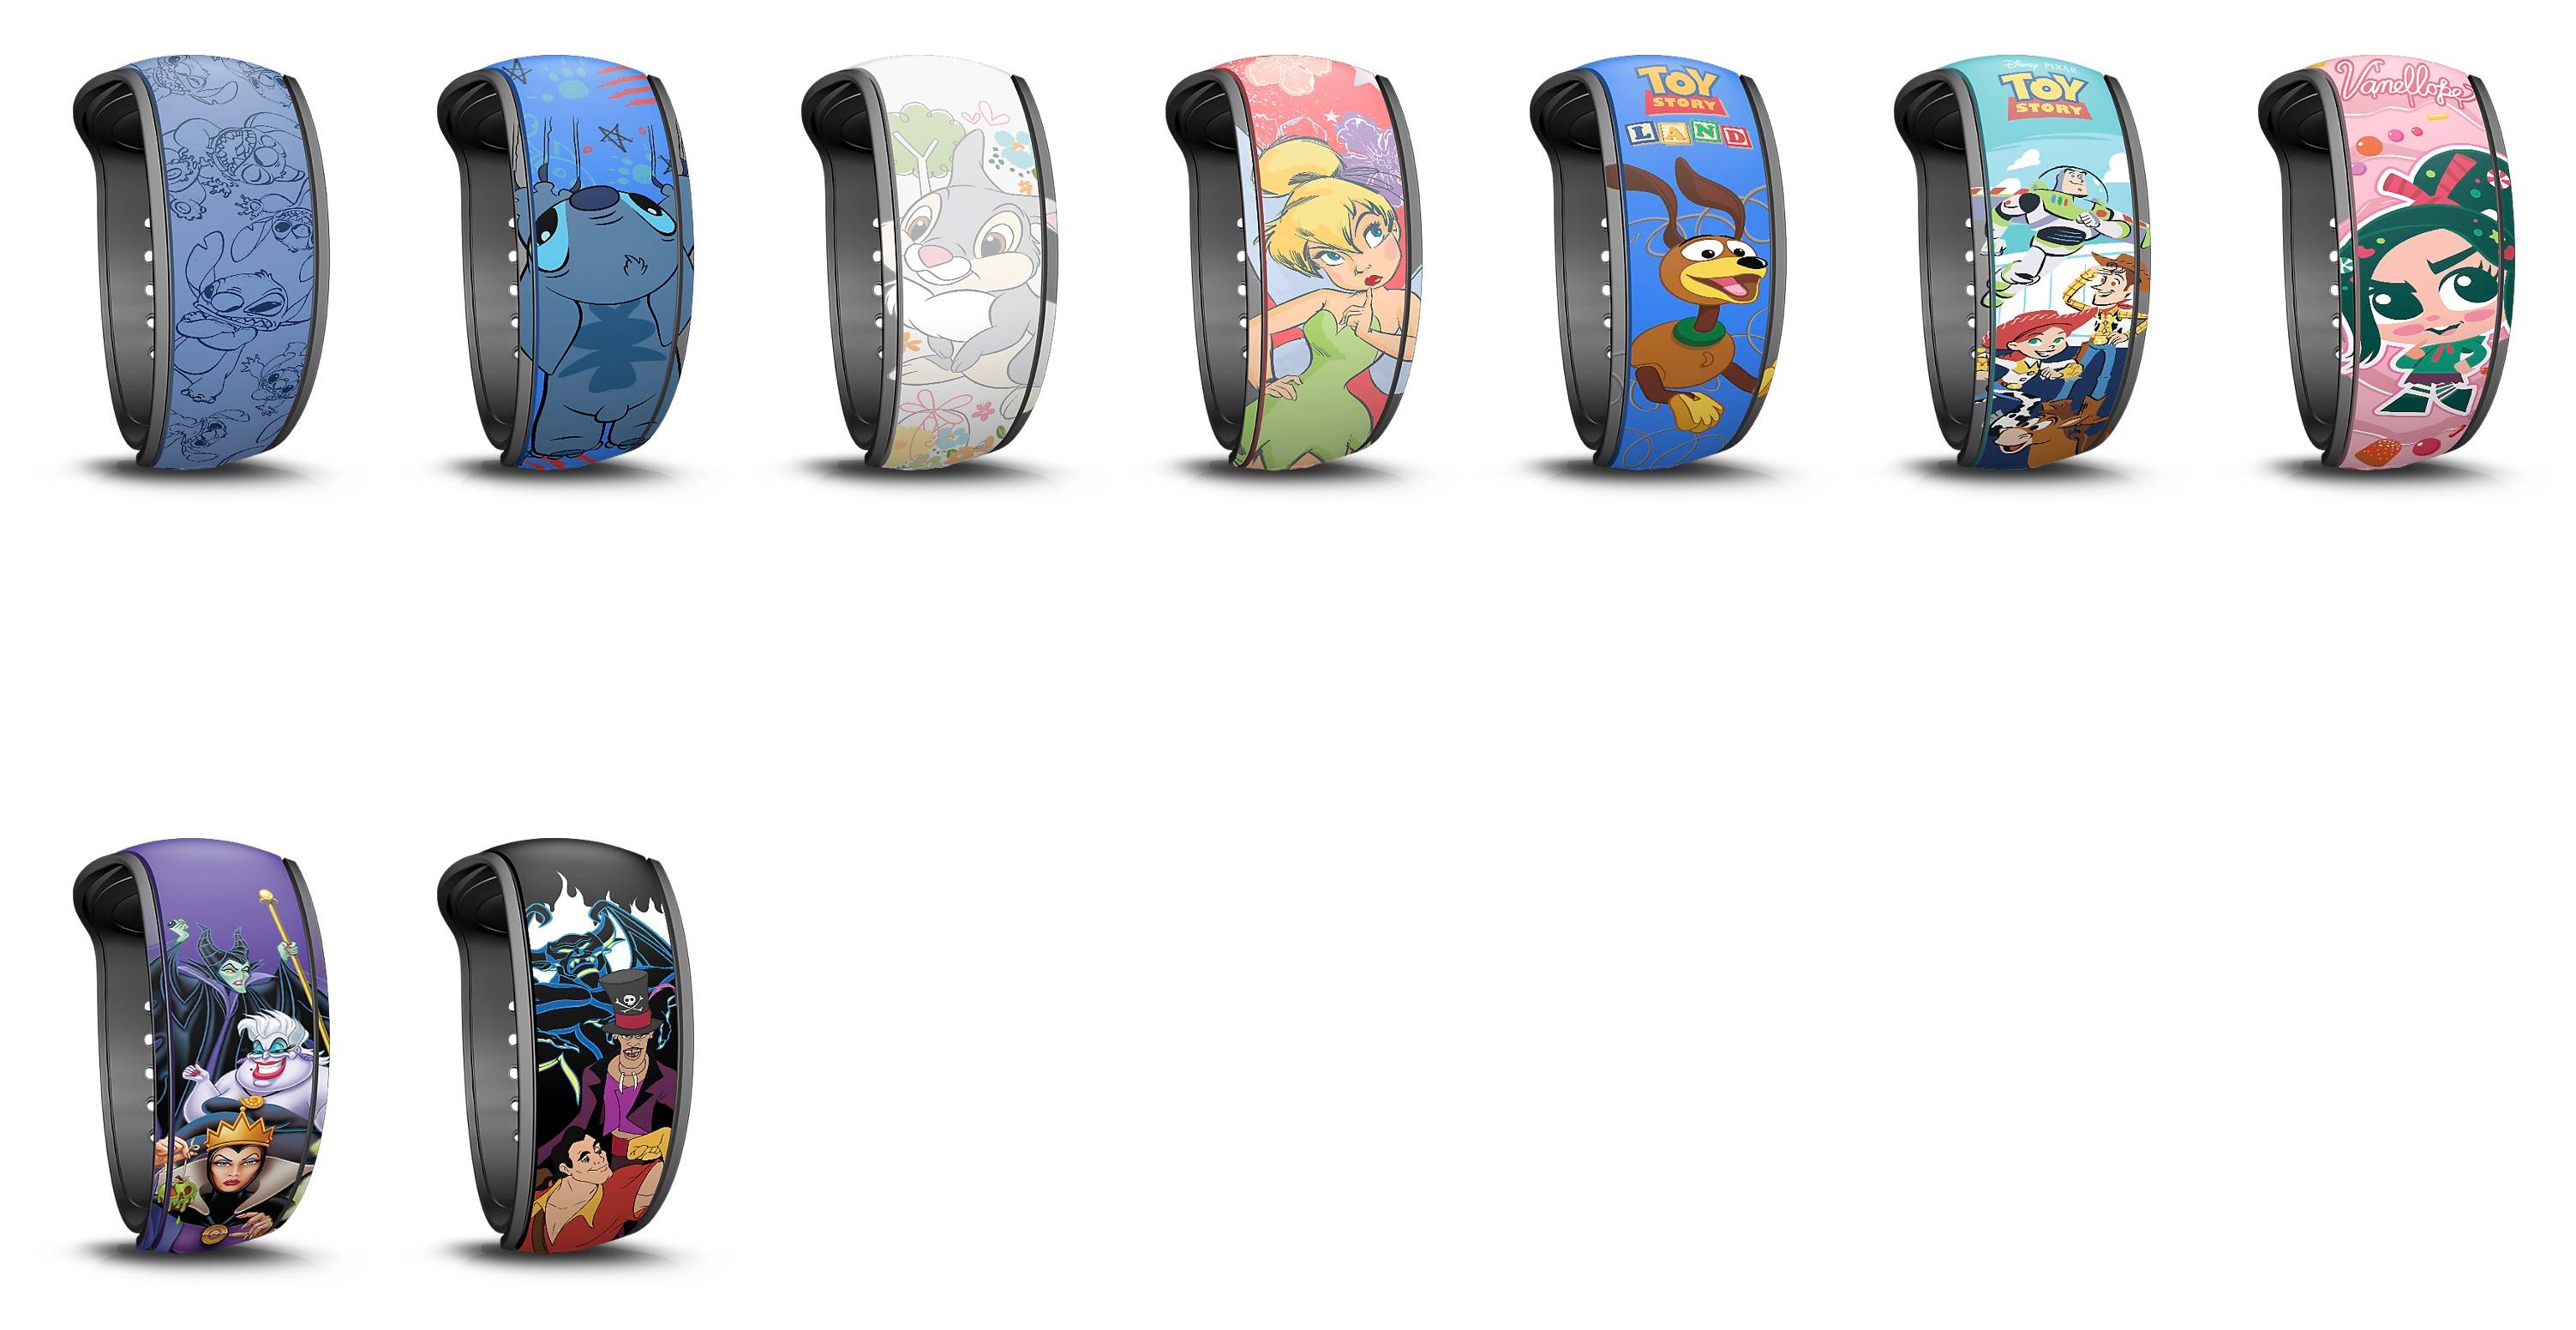 May 2019 MagicBand options for resort guests and passholders